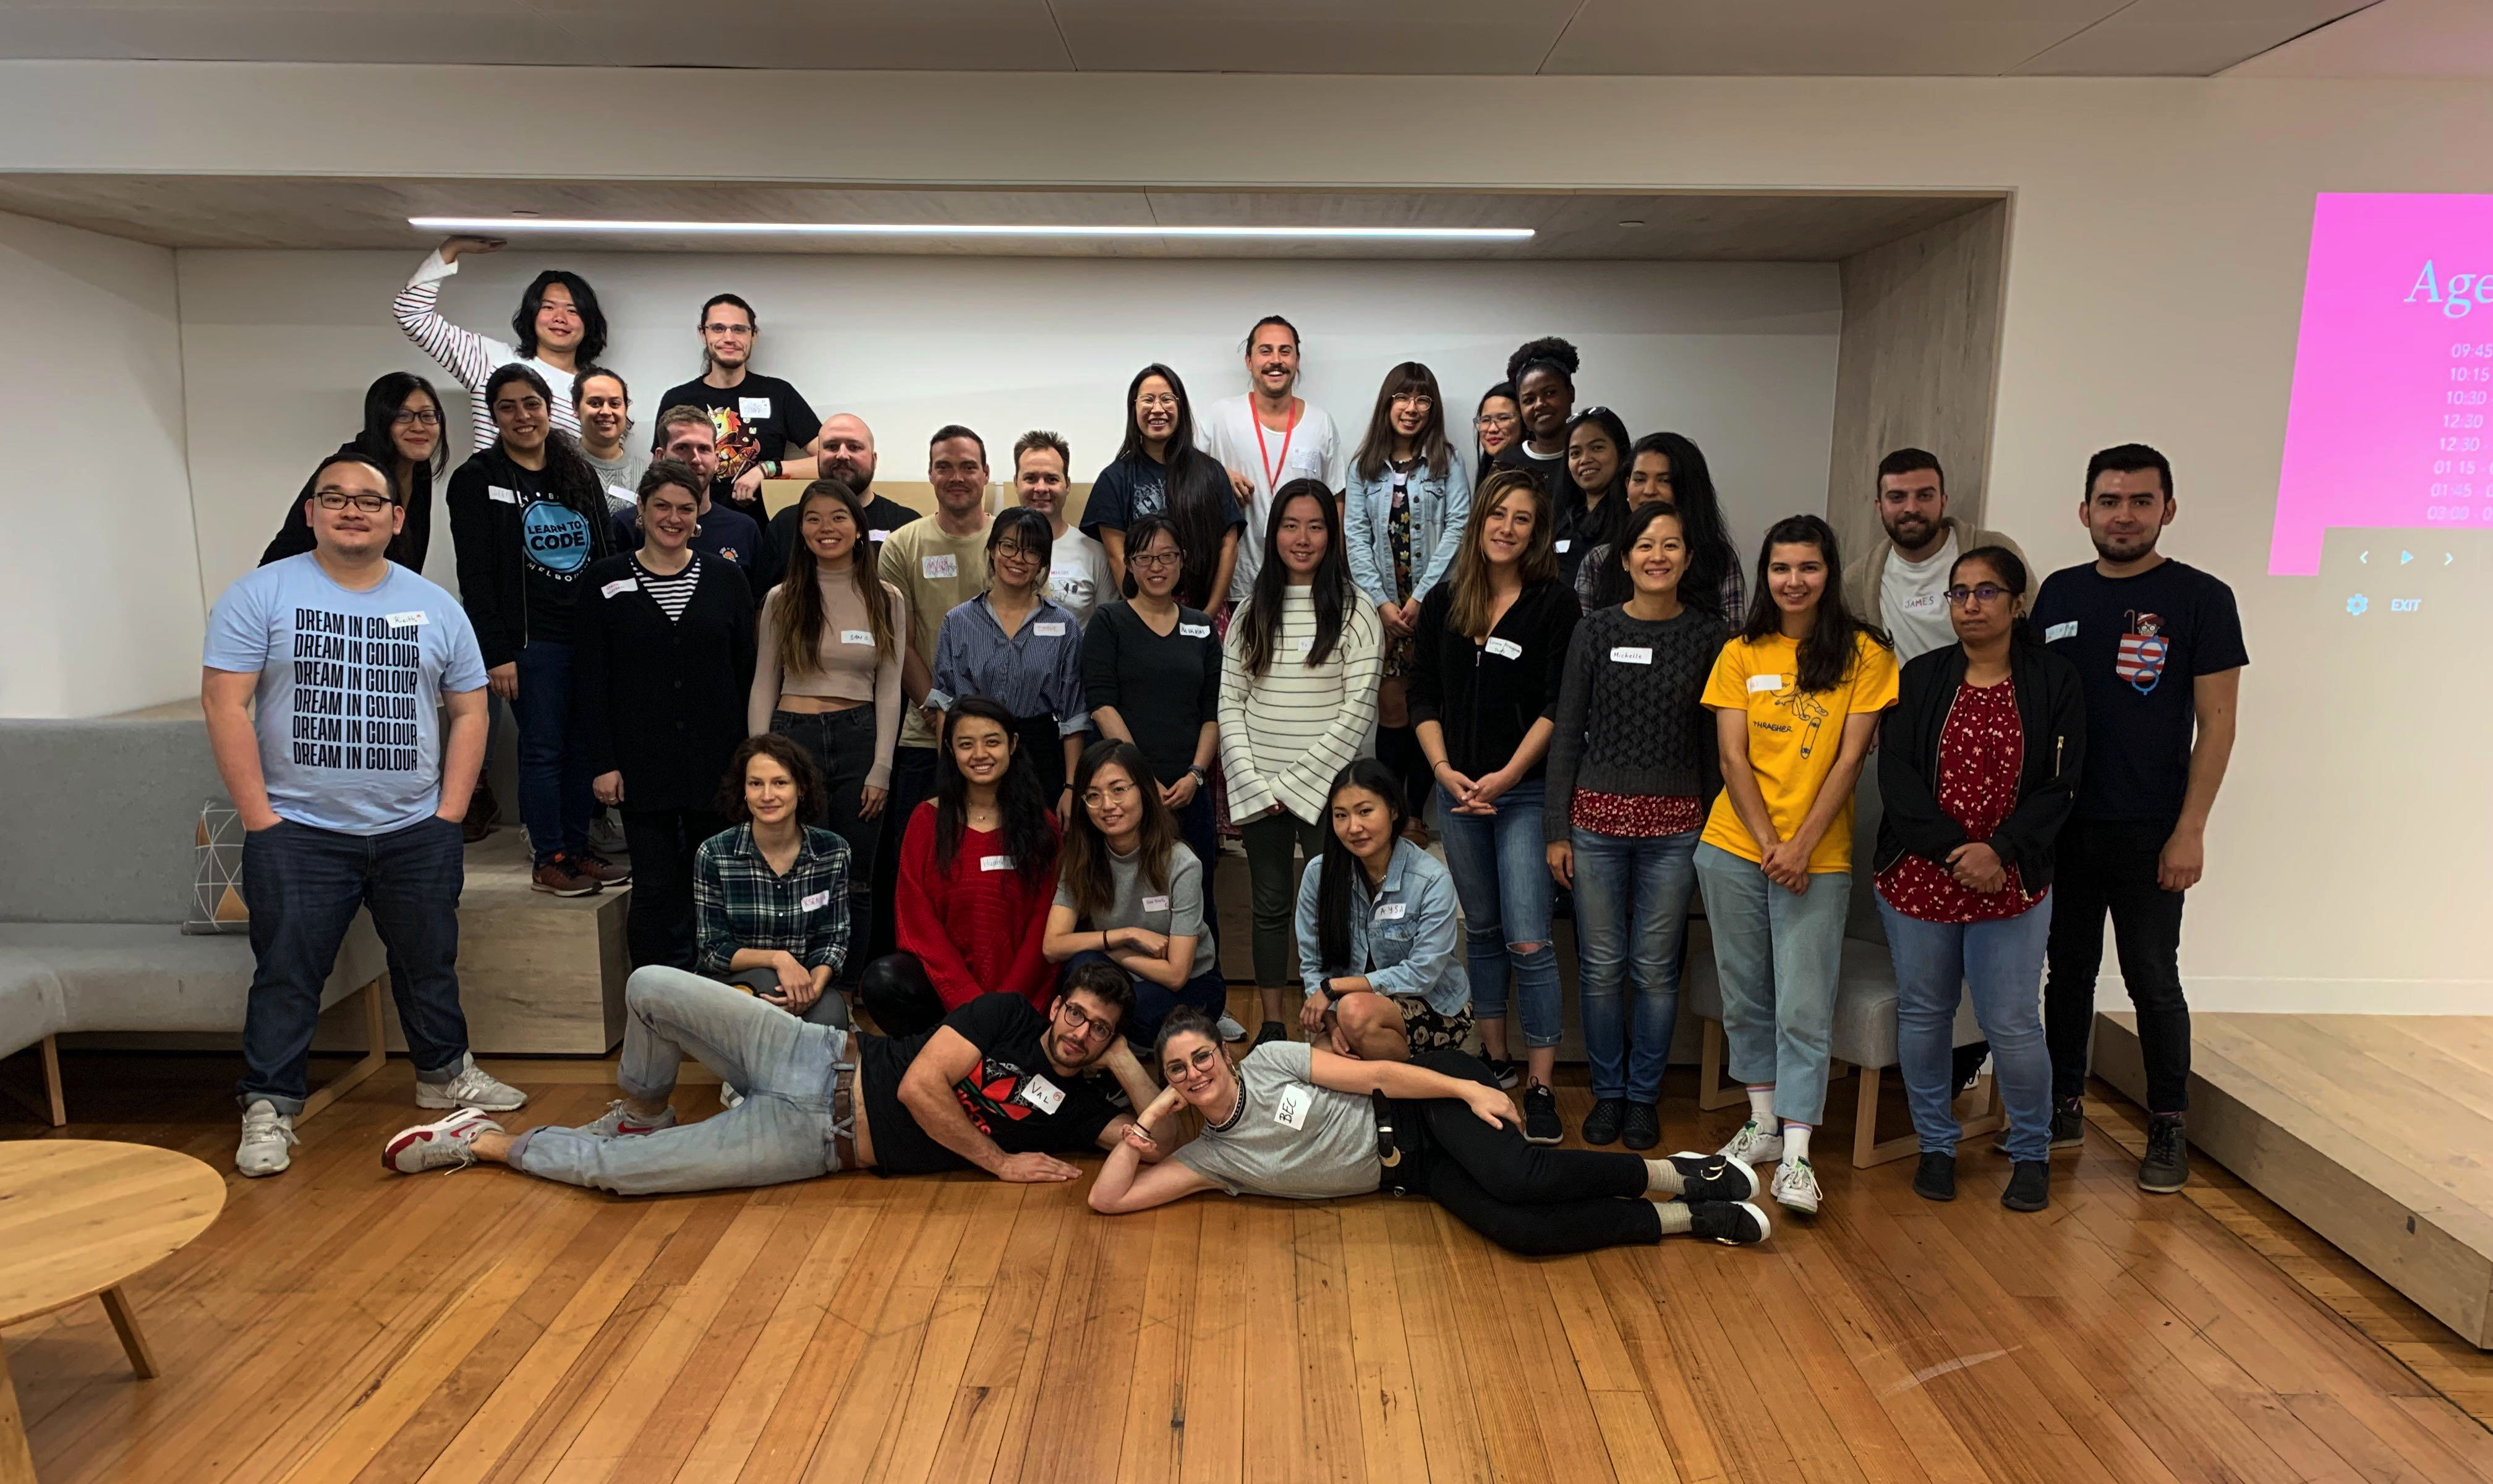 Group photo of Melbourne attendees